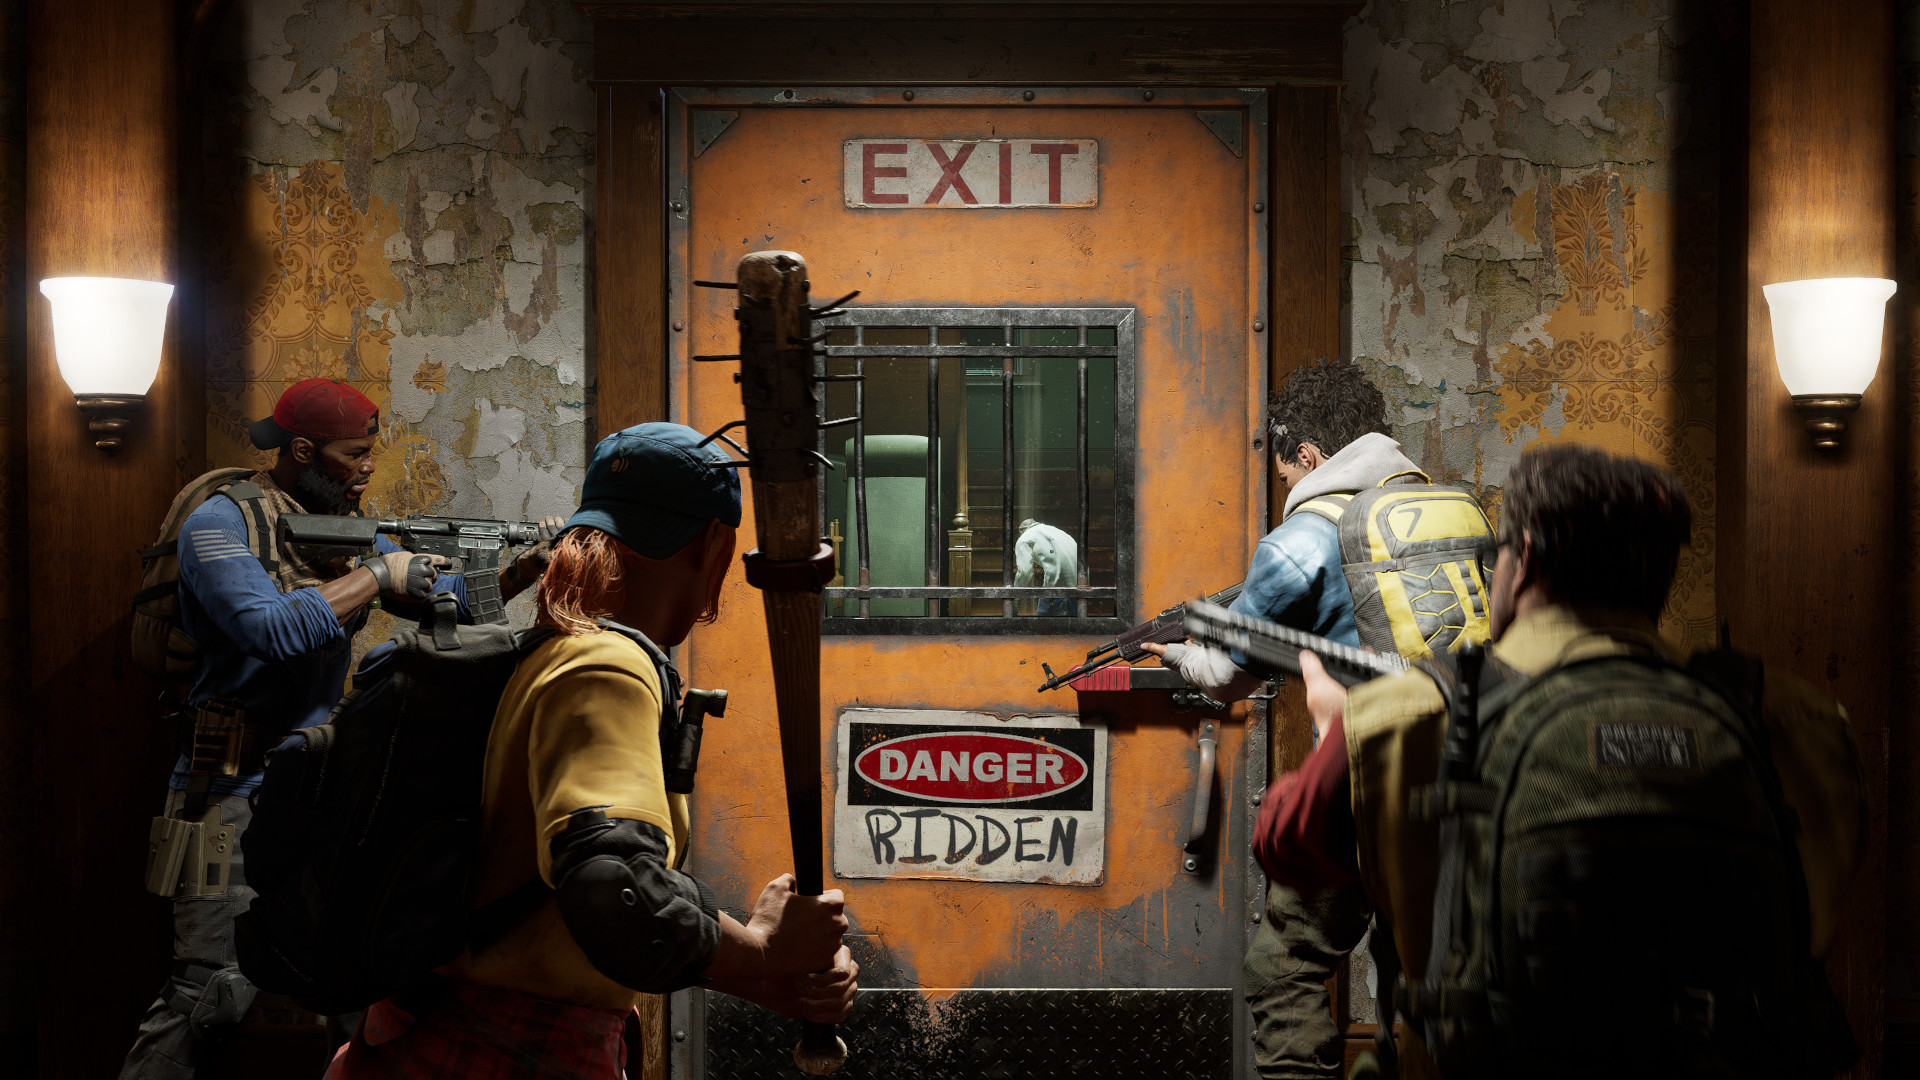 Back 4 Blood release date: Four characters with weapons at the ready huddled around a door with an 'exit' sign on it, warning of Ridden zombies.